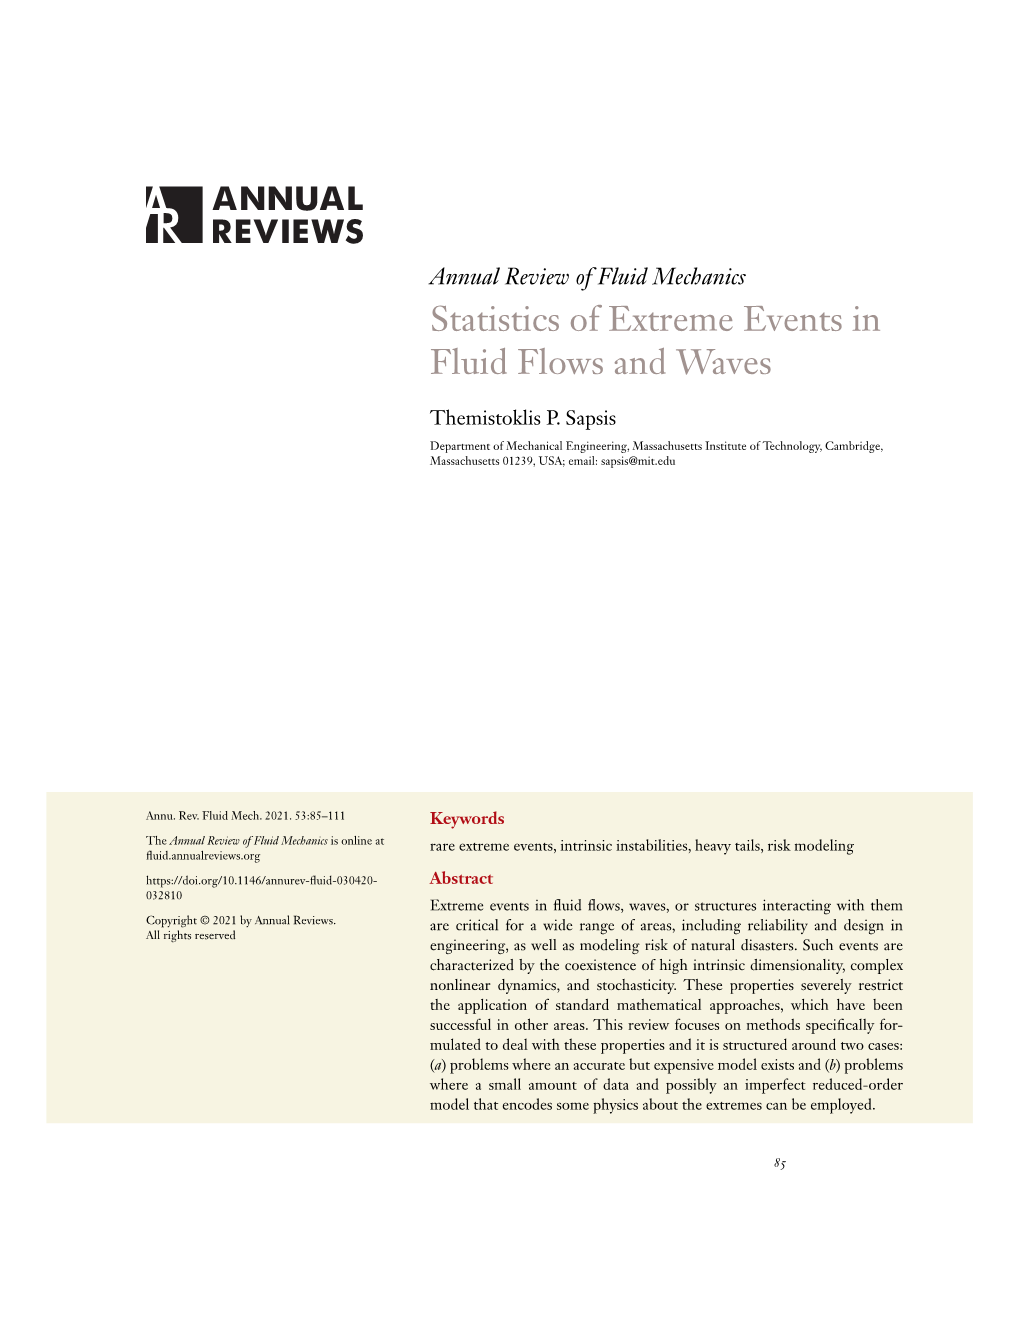 Statistics of Extreme Events in Fluid Flows and Waves